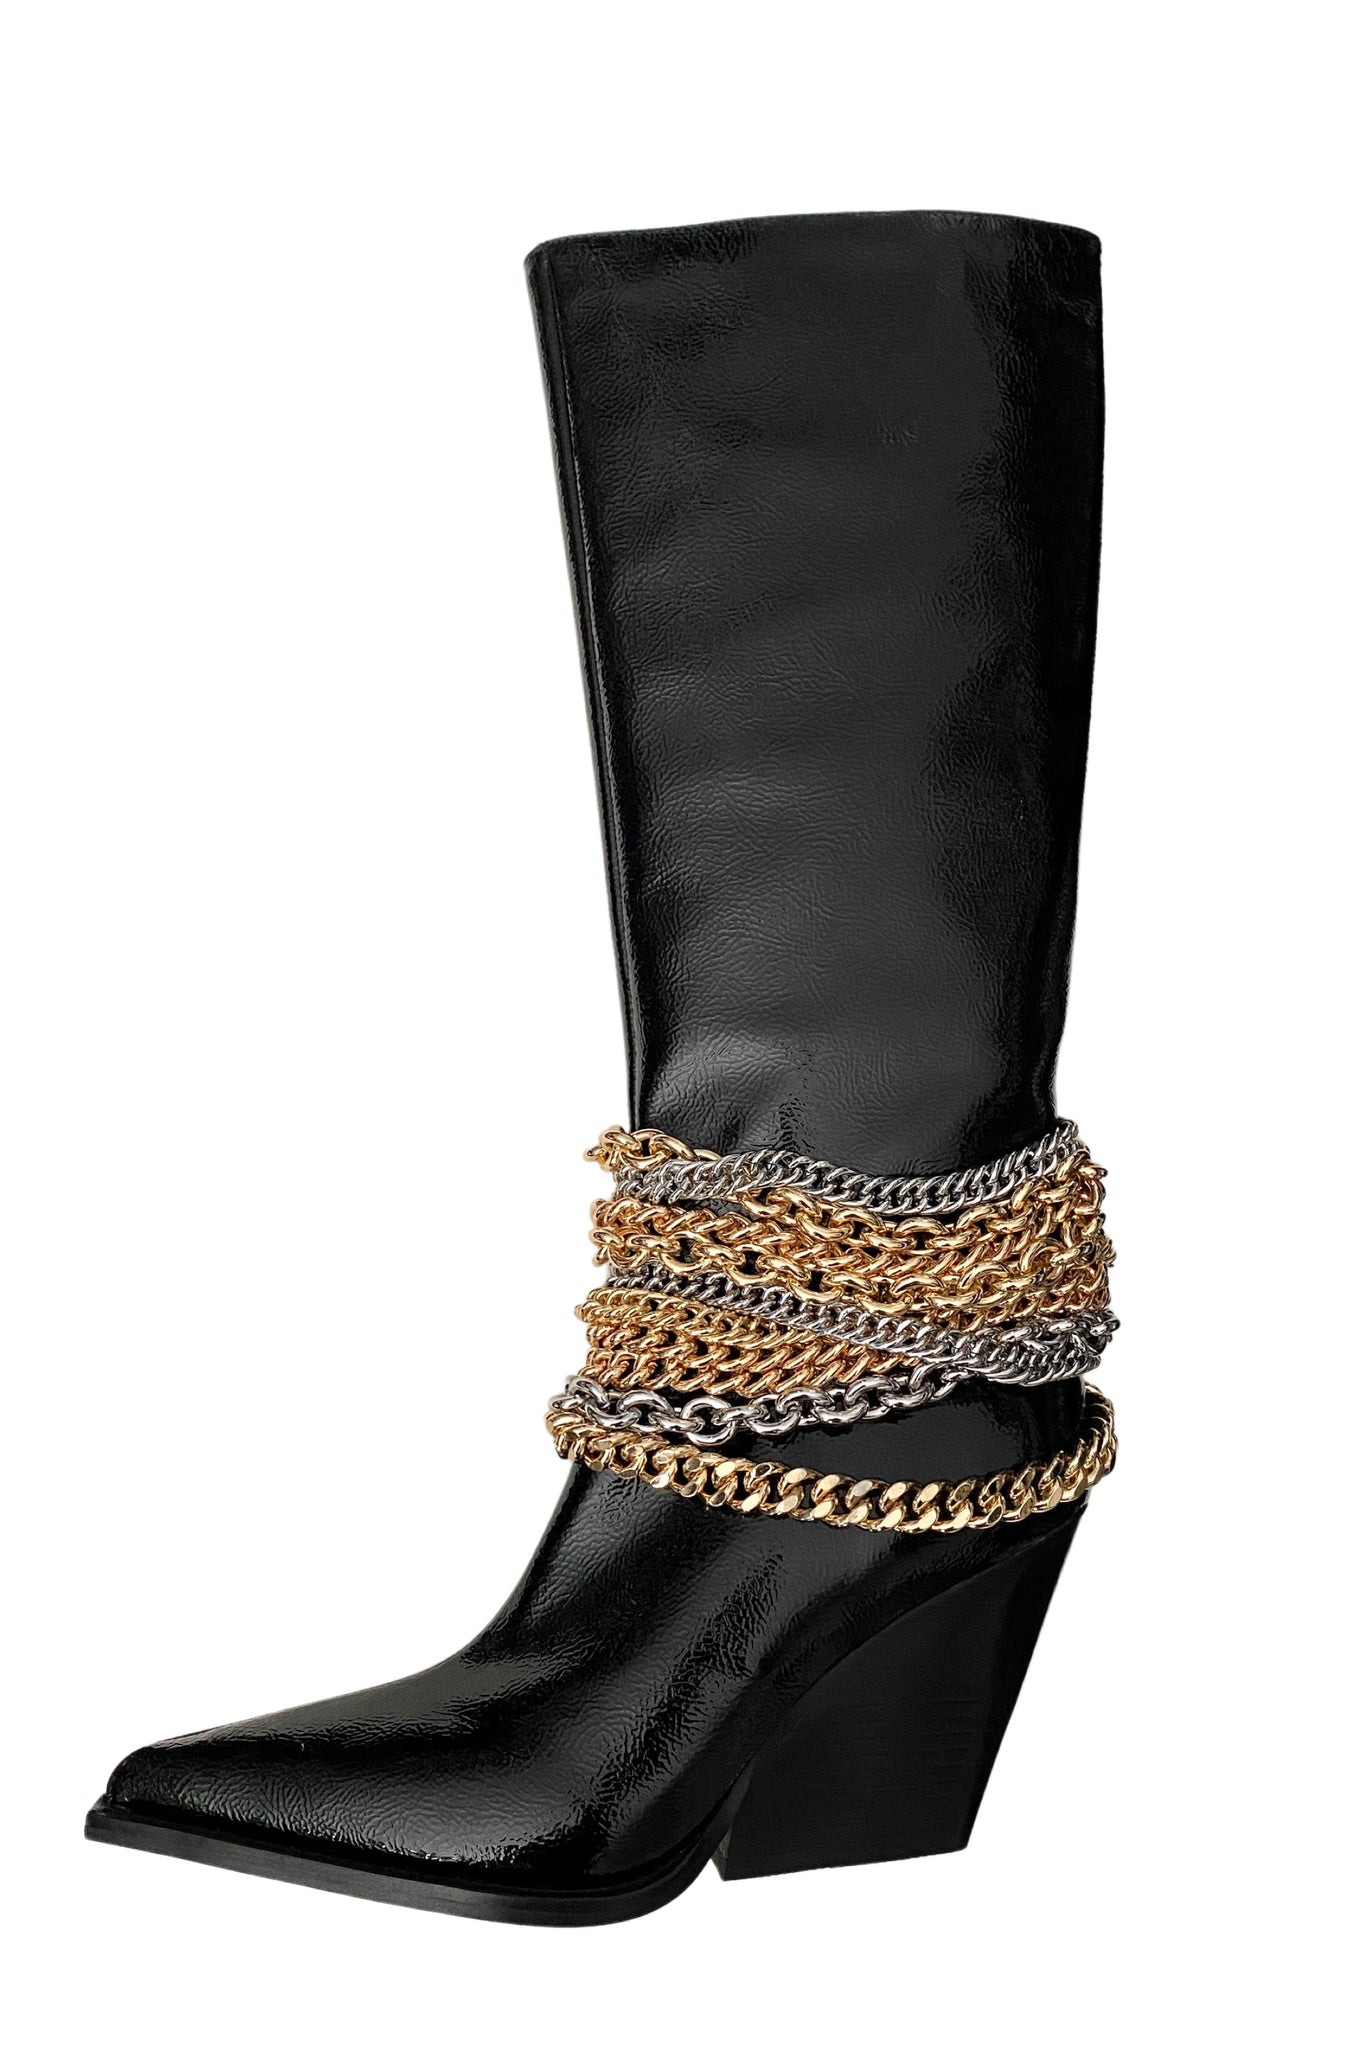 JEFFREY CAMPBELL ITS-A-DRAW CHAIN BOOT - SIZE 7